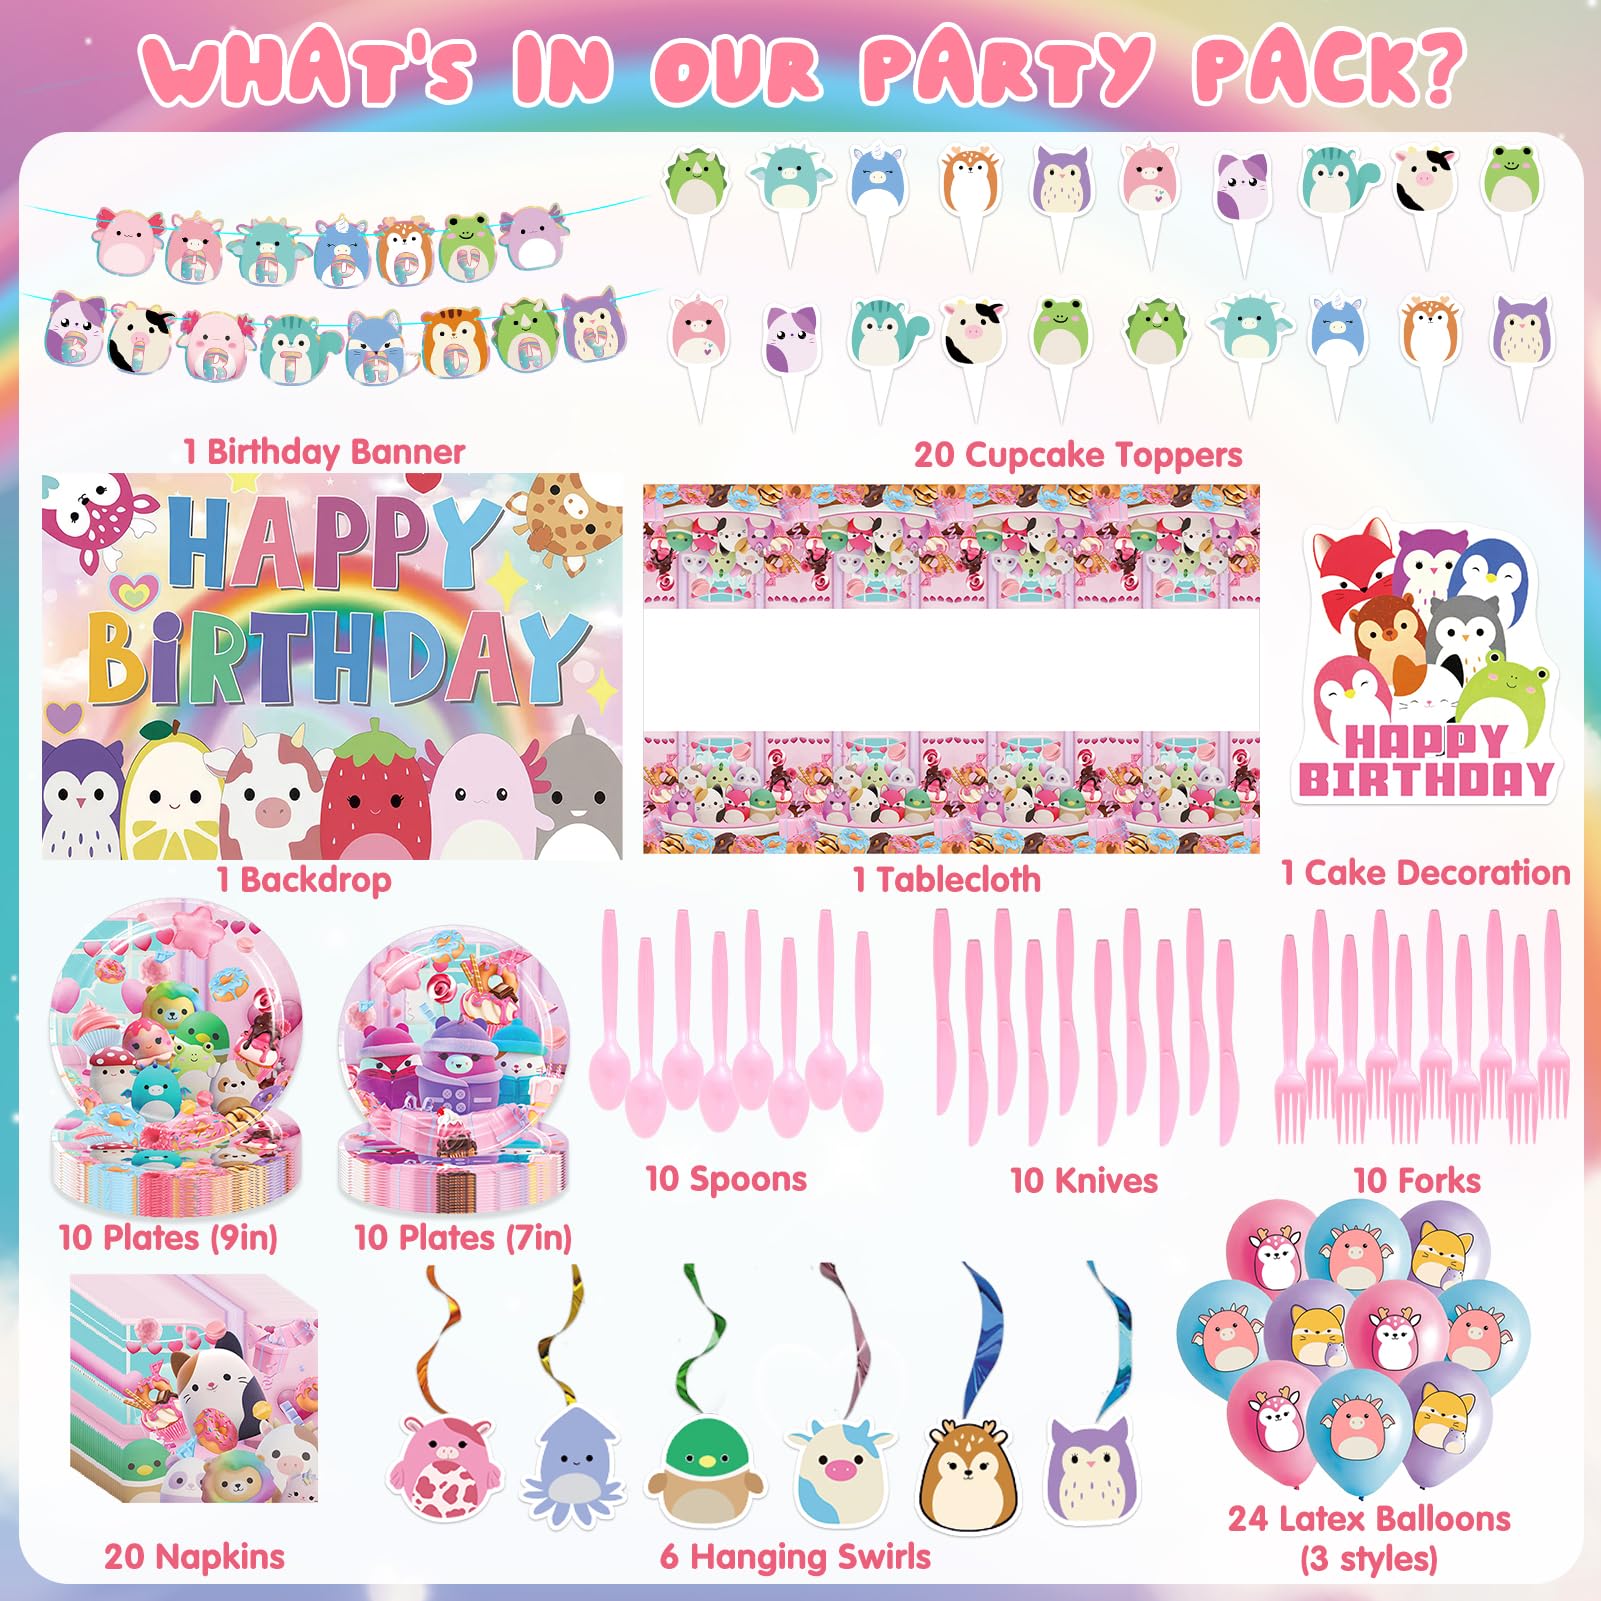 𝓢𝓺𝓾𝓲𝓼𝓱𝓶𝓪𝓵𝓵𝓸𝔀𝓼 Birthday Party Supplies - 151Pcs 𝓢𝓺𝓾𝓲𝓼𝓱𝓶𝓪𝓵𝓵𝓸𝔀𝓼 Birthday Decorations include Banner Tablecloth Backdrop Ballons Cupcake Cake Toppers Tableware Hanging Swirls